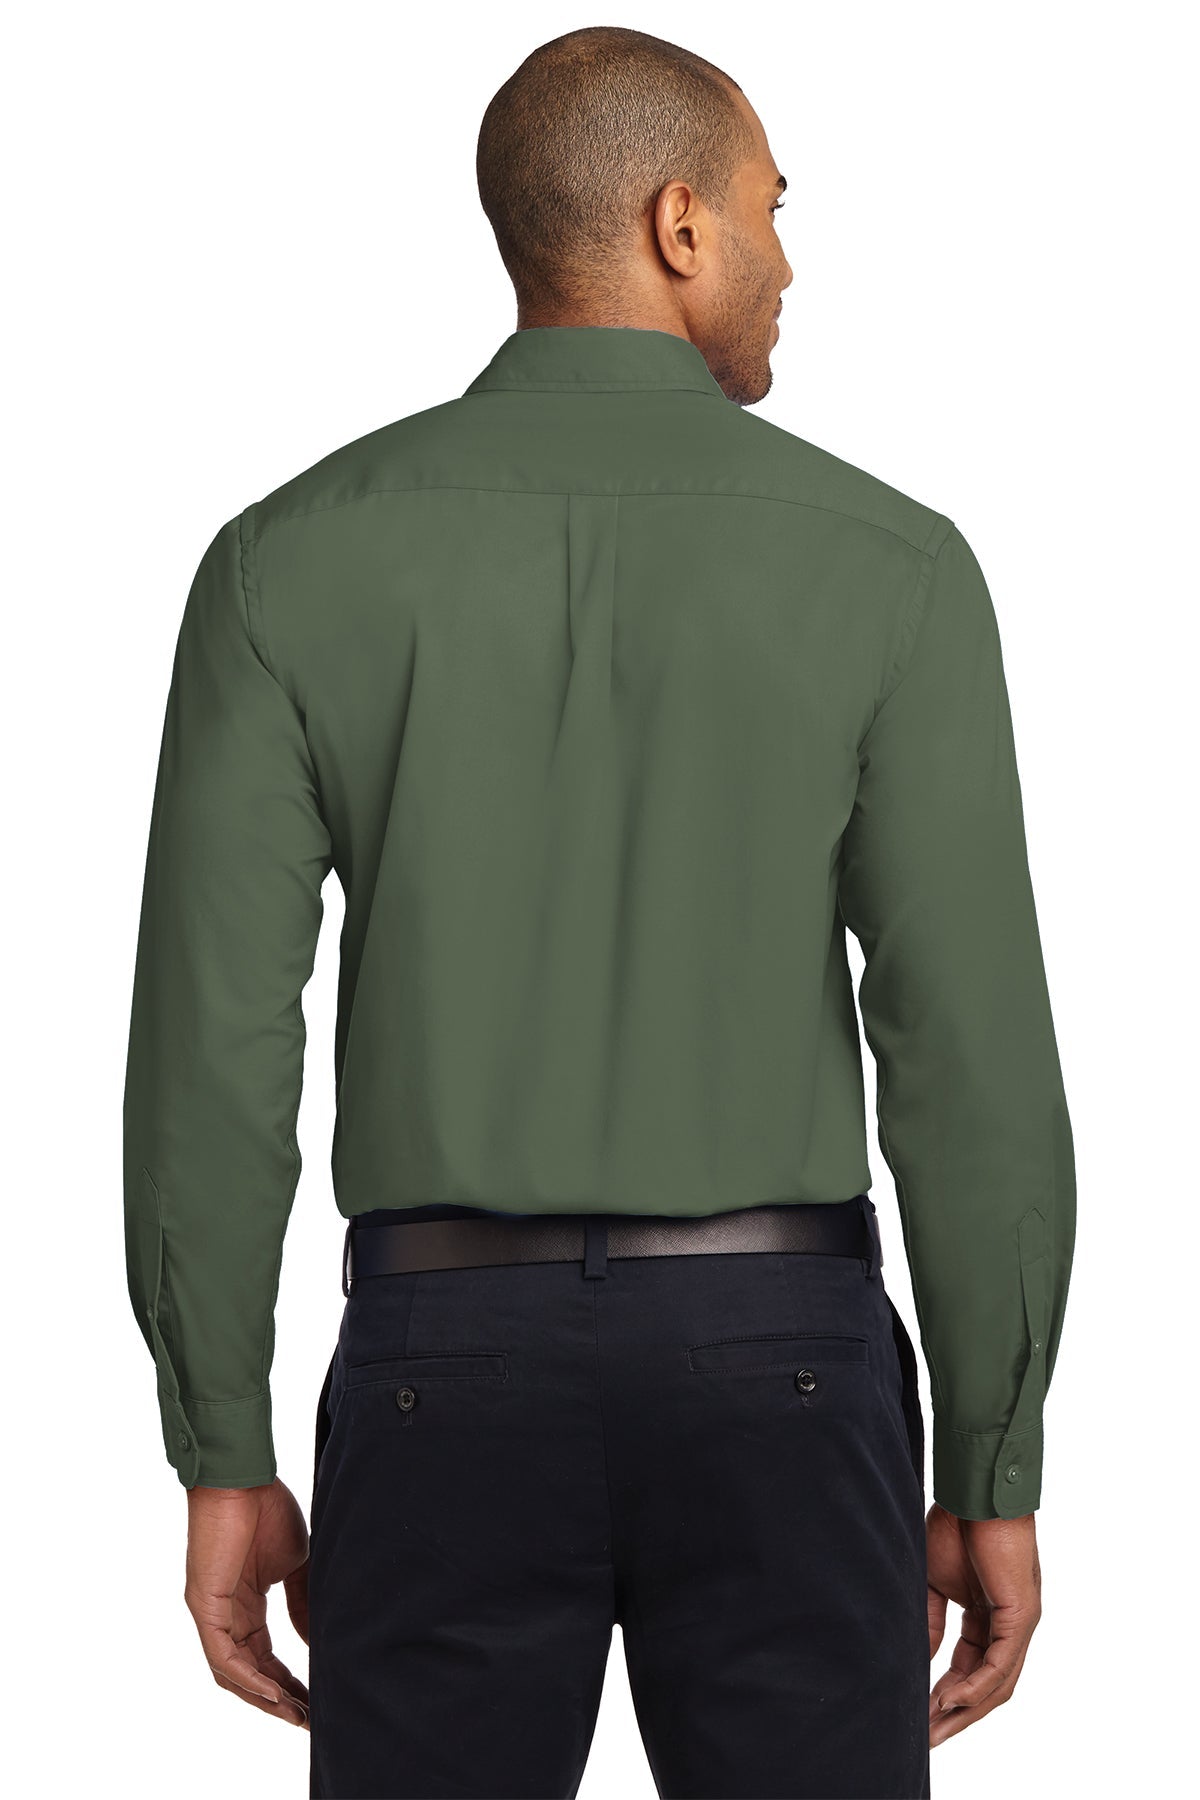 port authority_s608 _clover green_company_logo_button downs